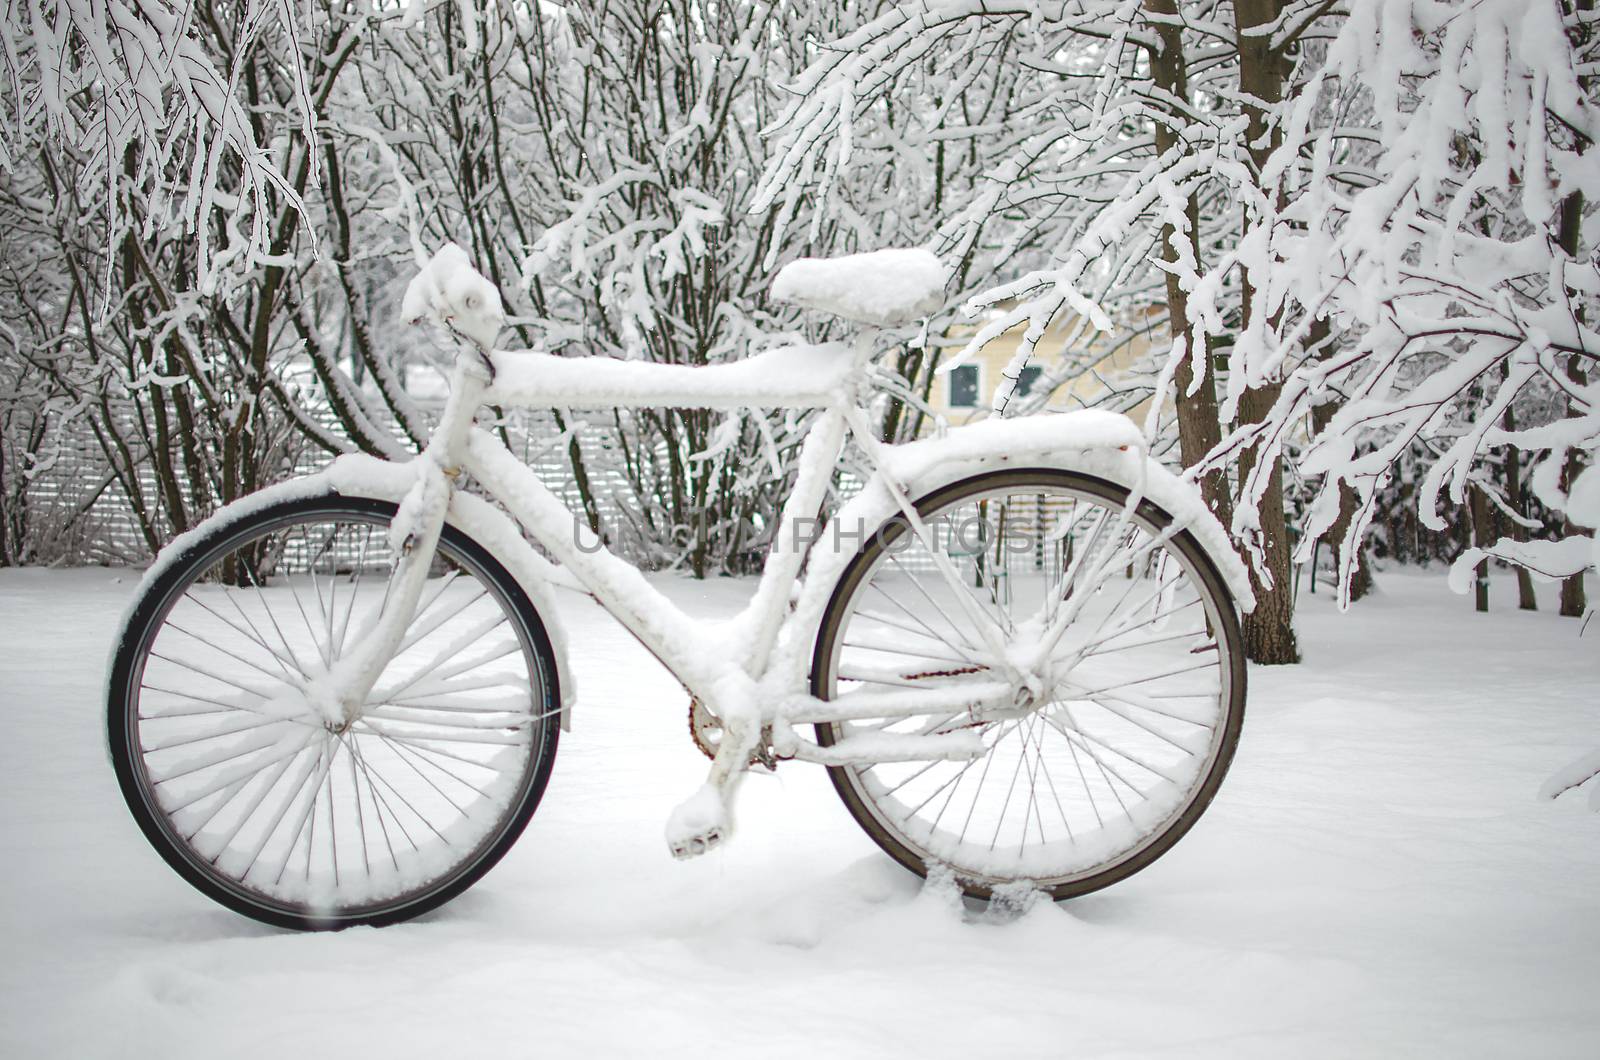 Winter bike. Bike under the snow. Bicycle in the park full of fresh deep snow. by KajaNi